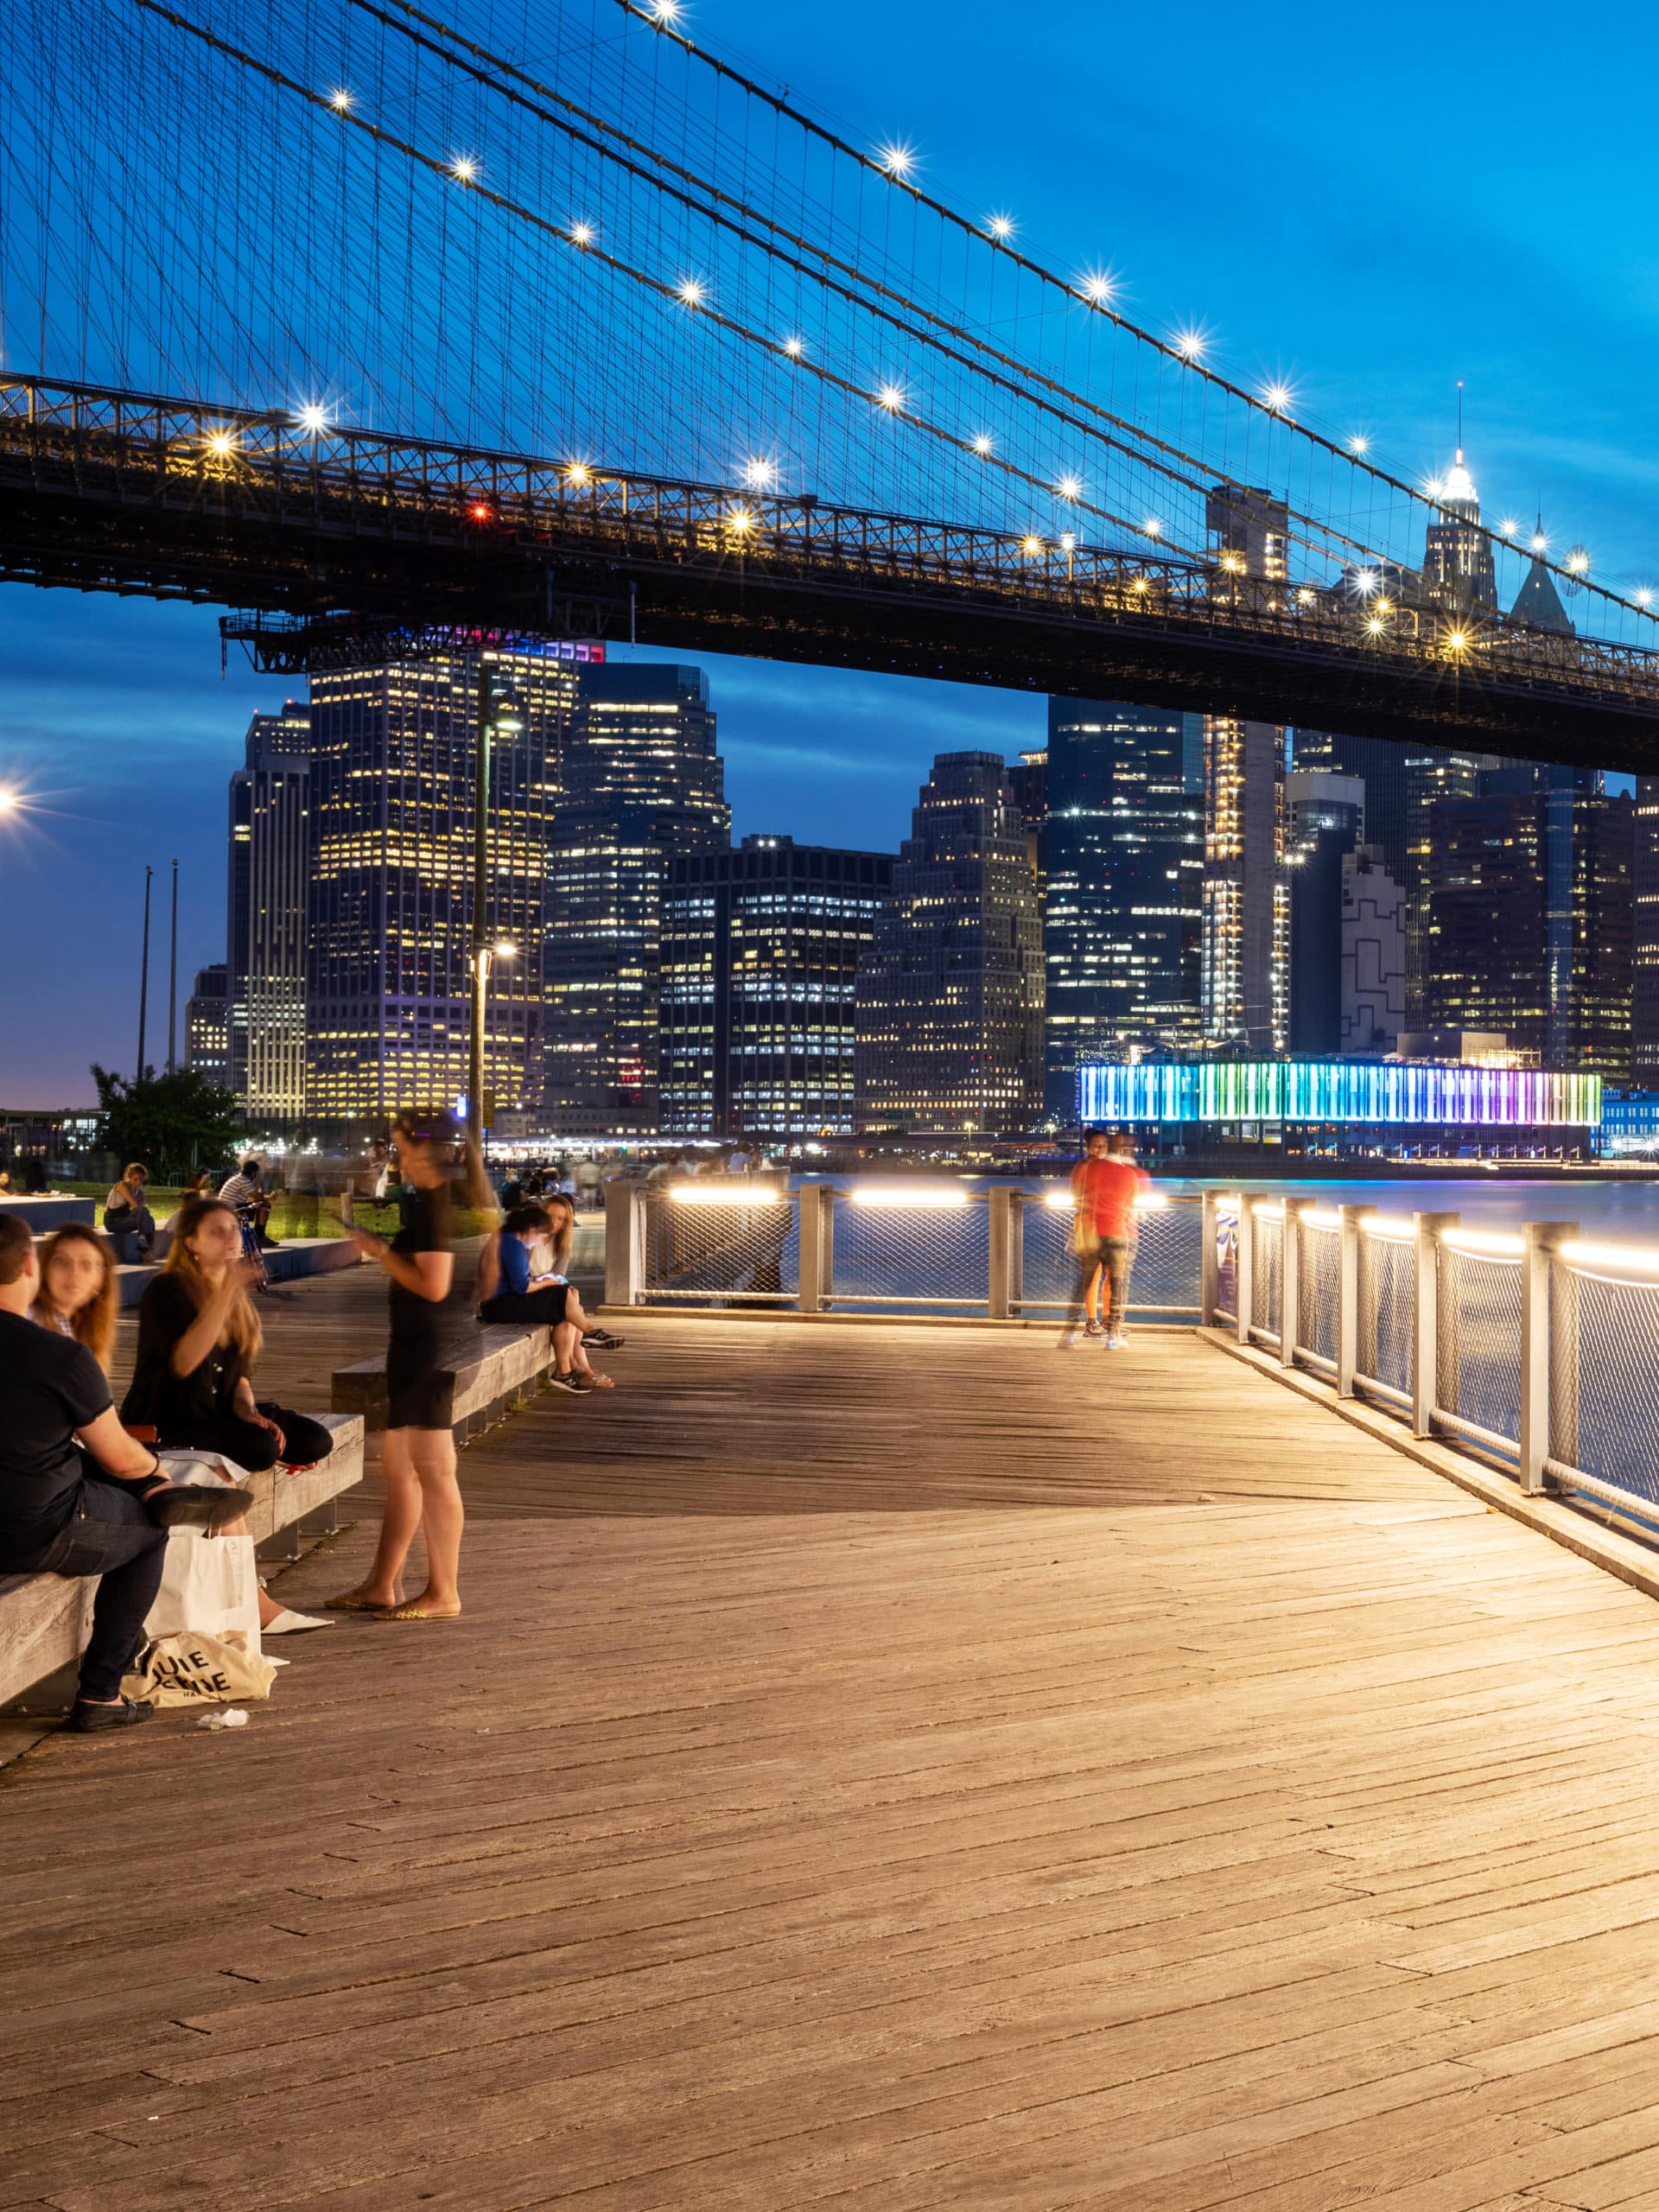 People sitting on the boardwalk at night with a view of the Brooklyn Bridge and Pier 17 in Manhattan.